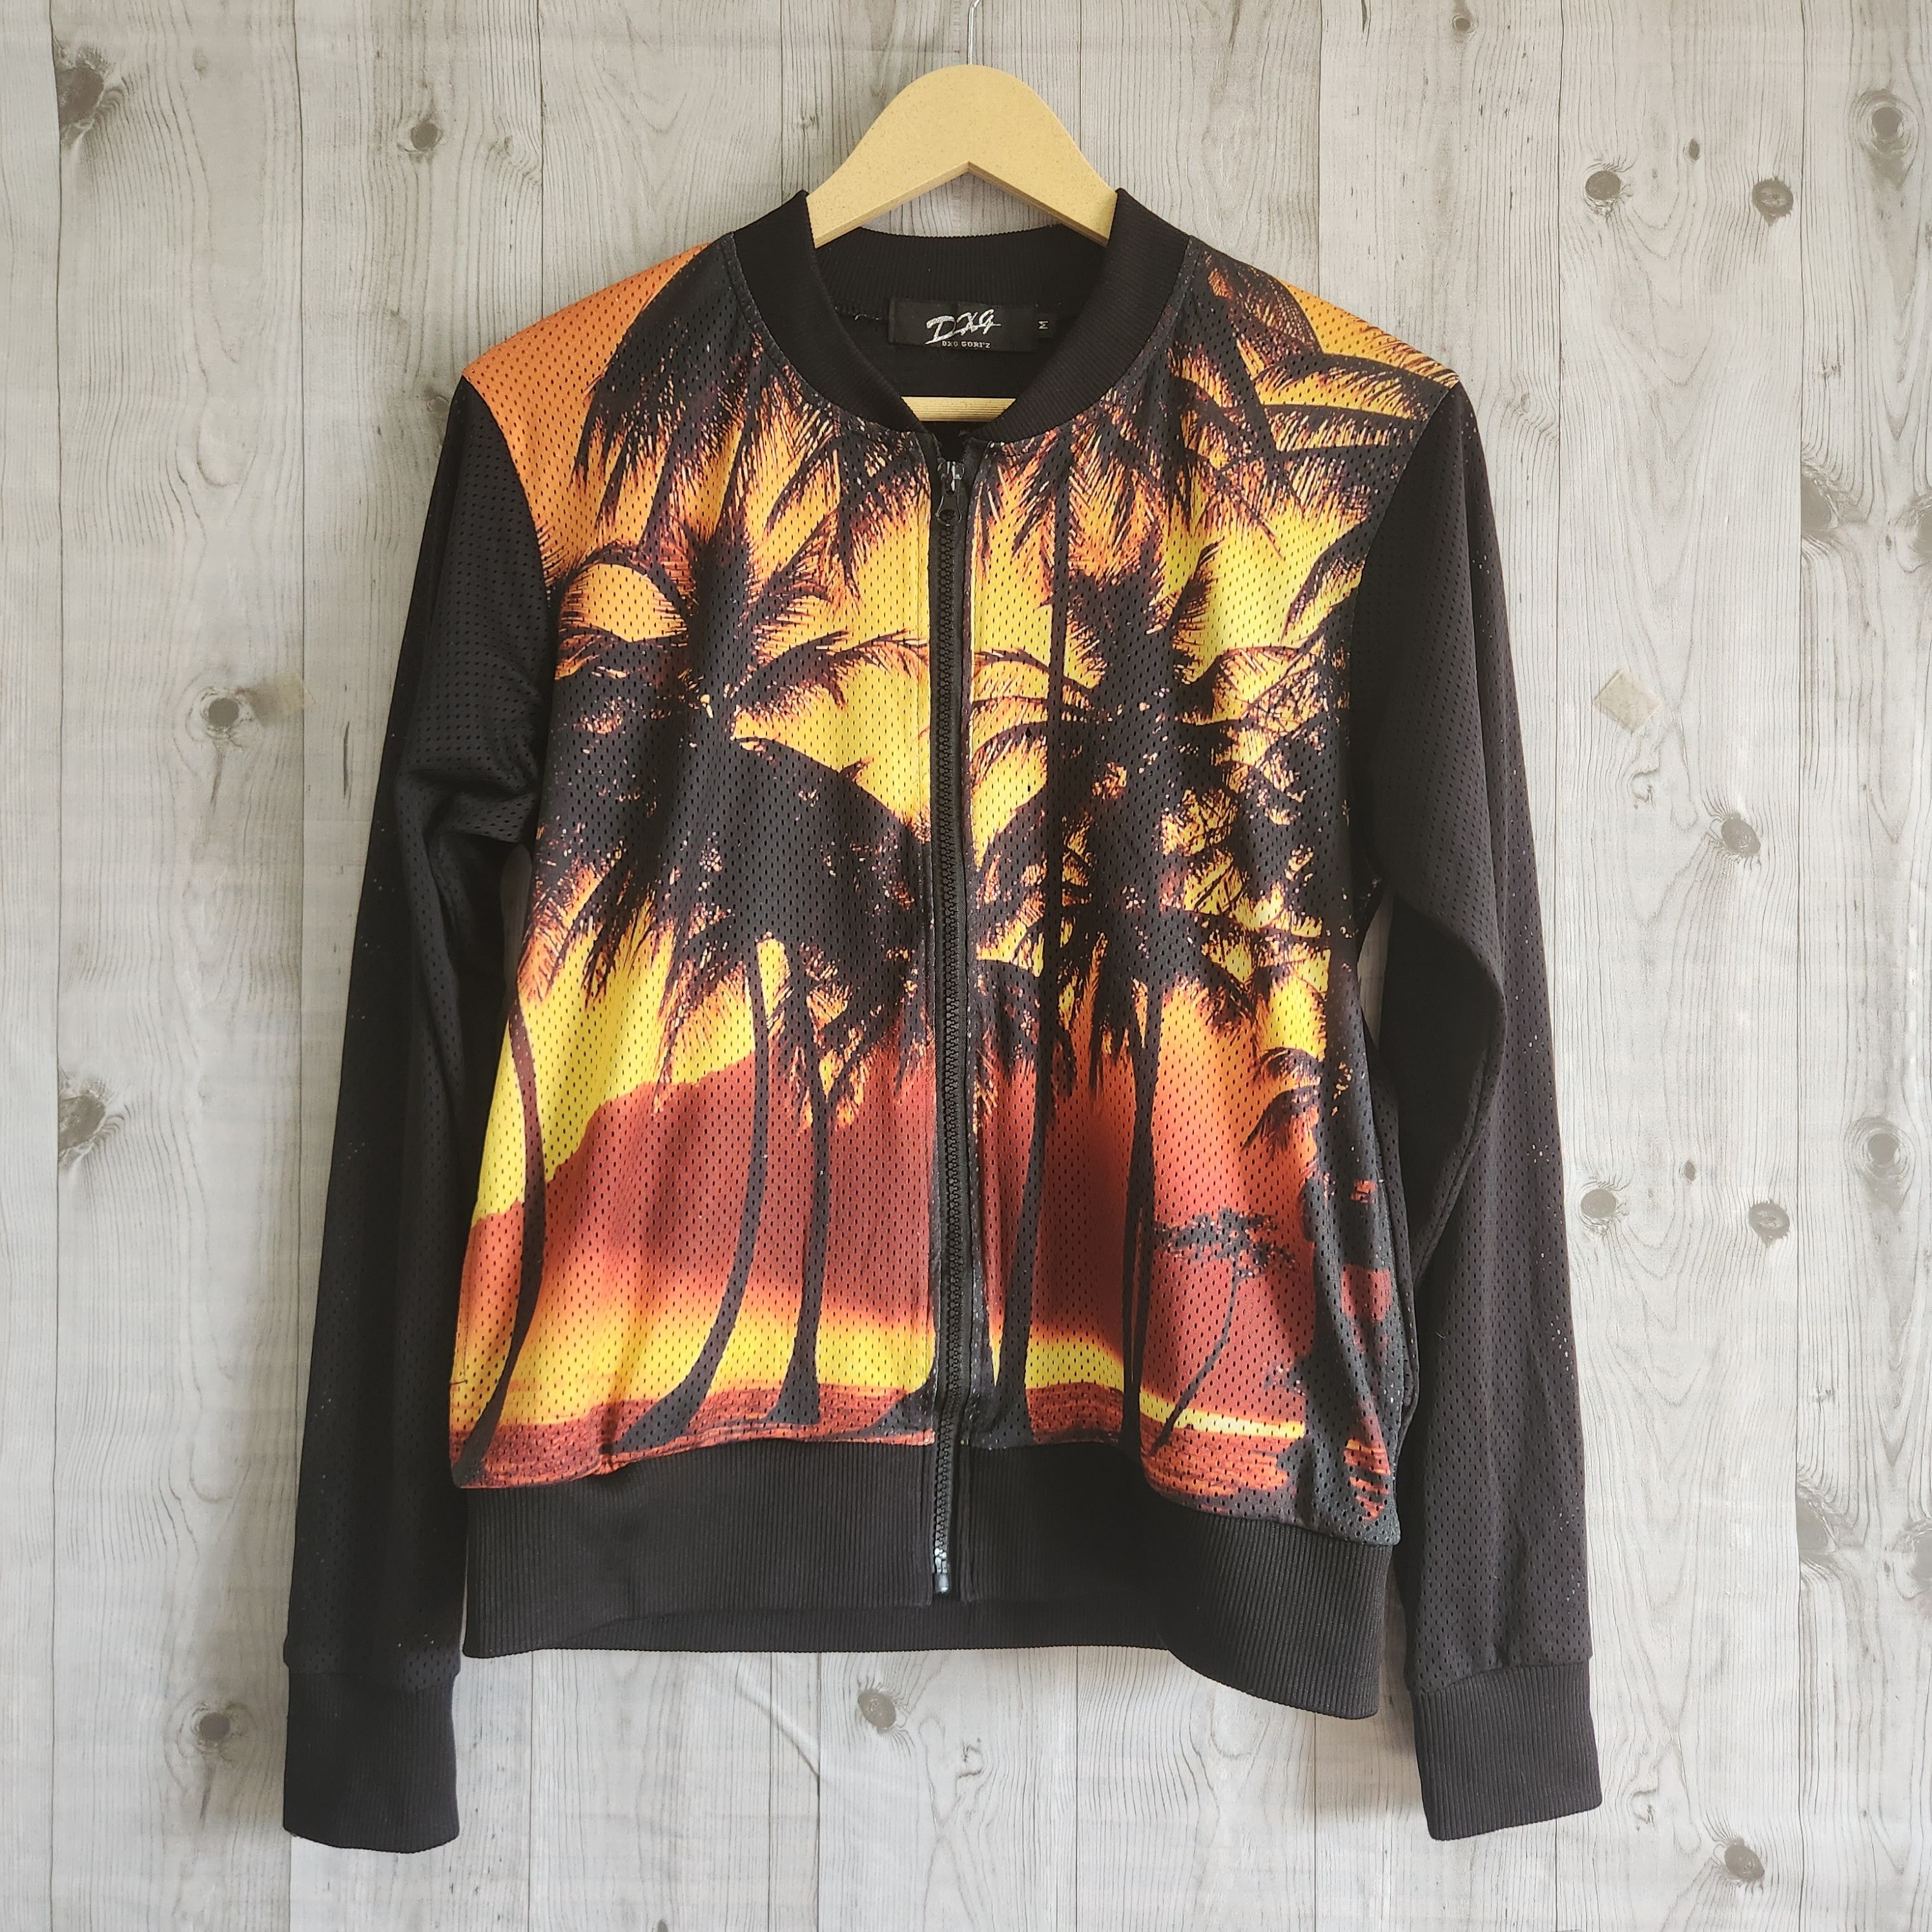 Japanese Brand - Steal Mesh Jacket With Coconut Beach Printed - 1